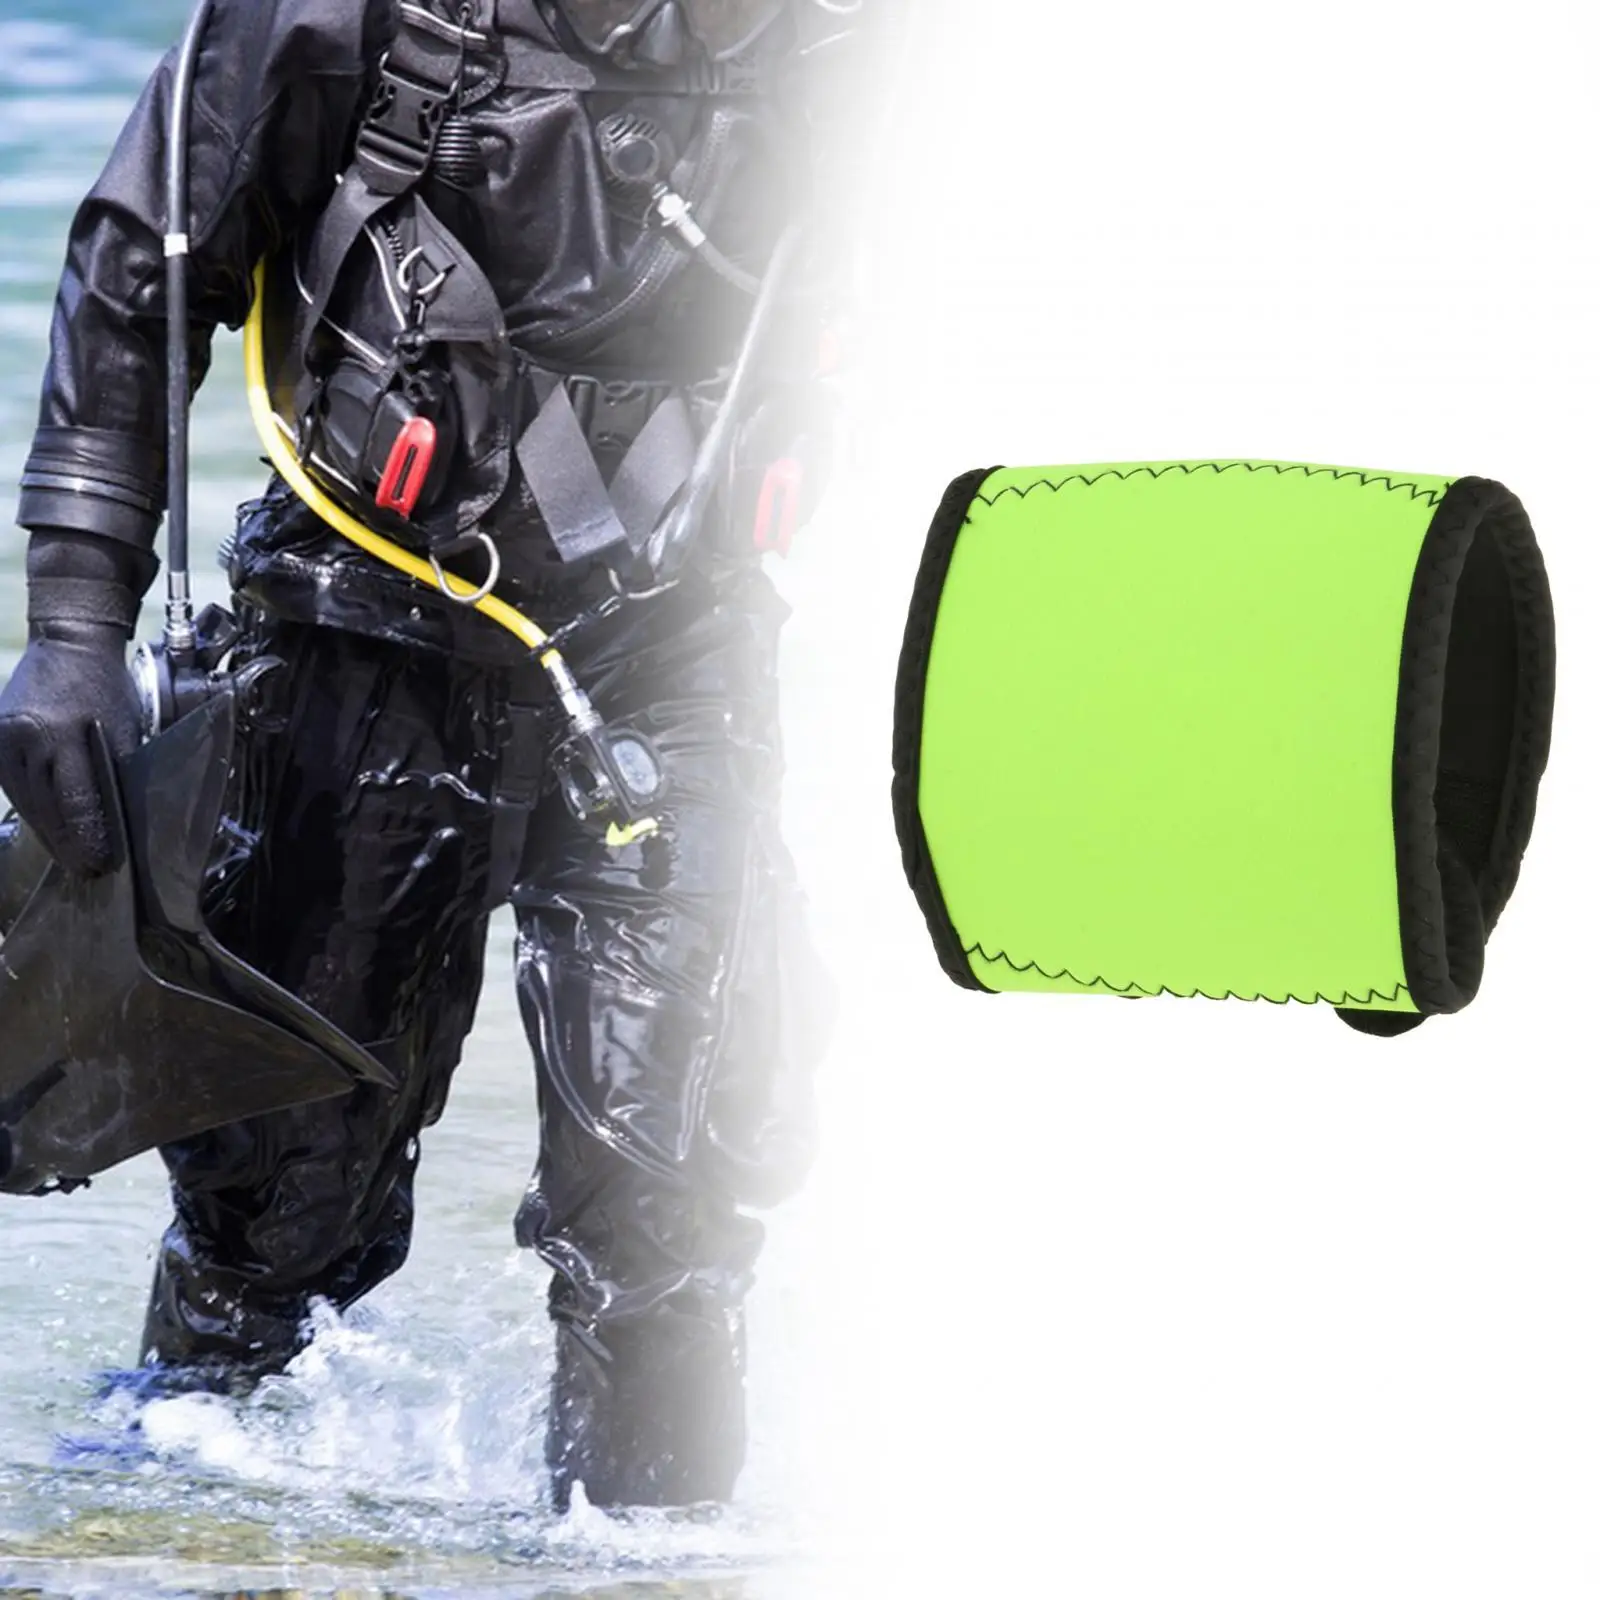 Scuba 2ND Stage Protection, Regulator Protector Protective Portable Durable Gear